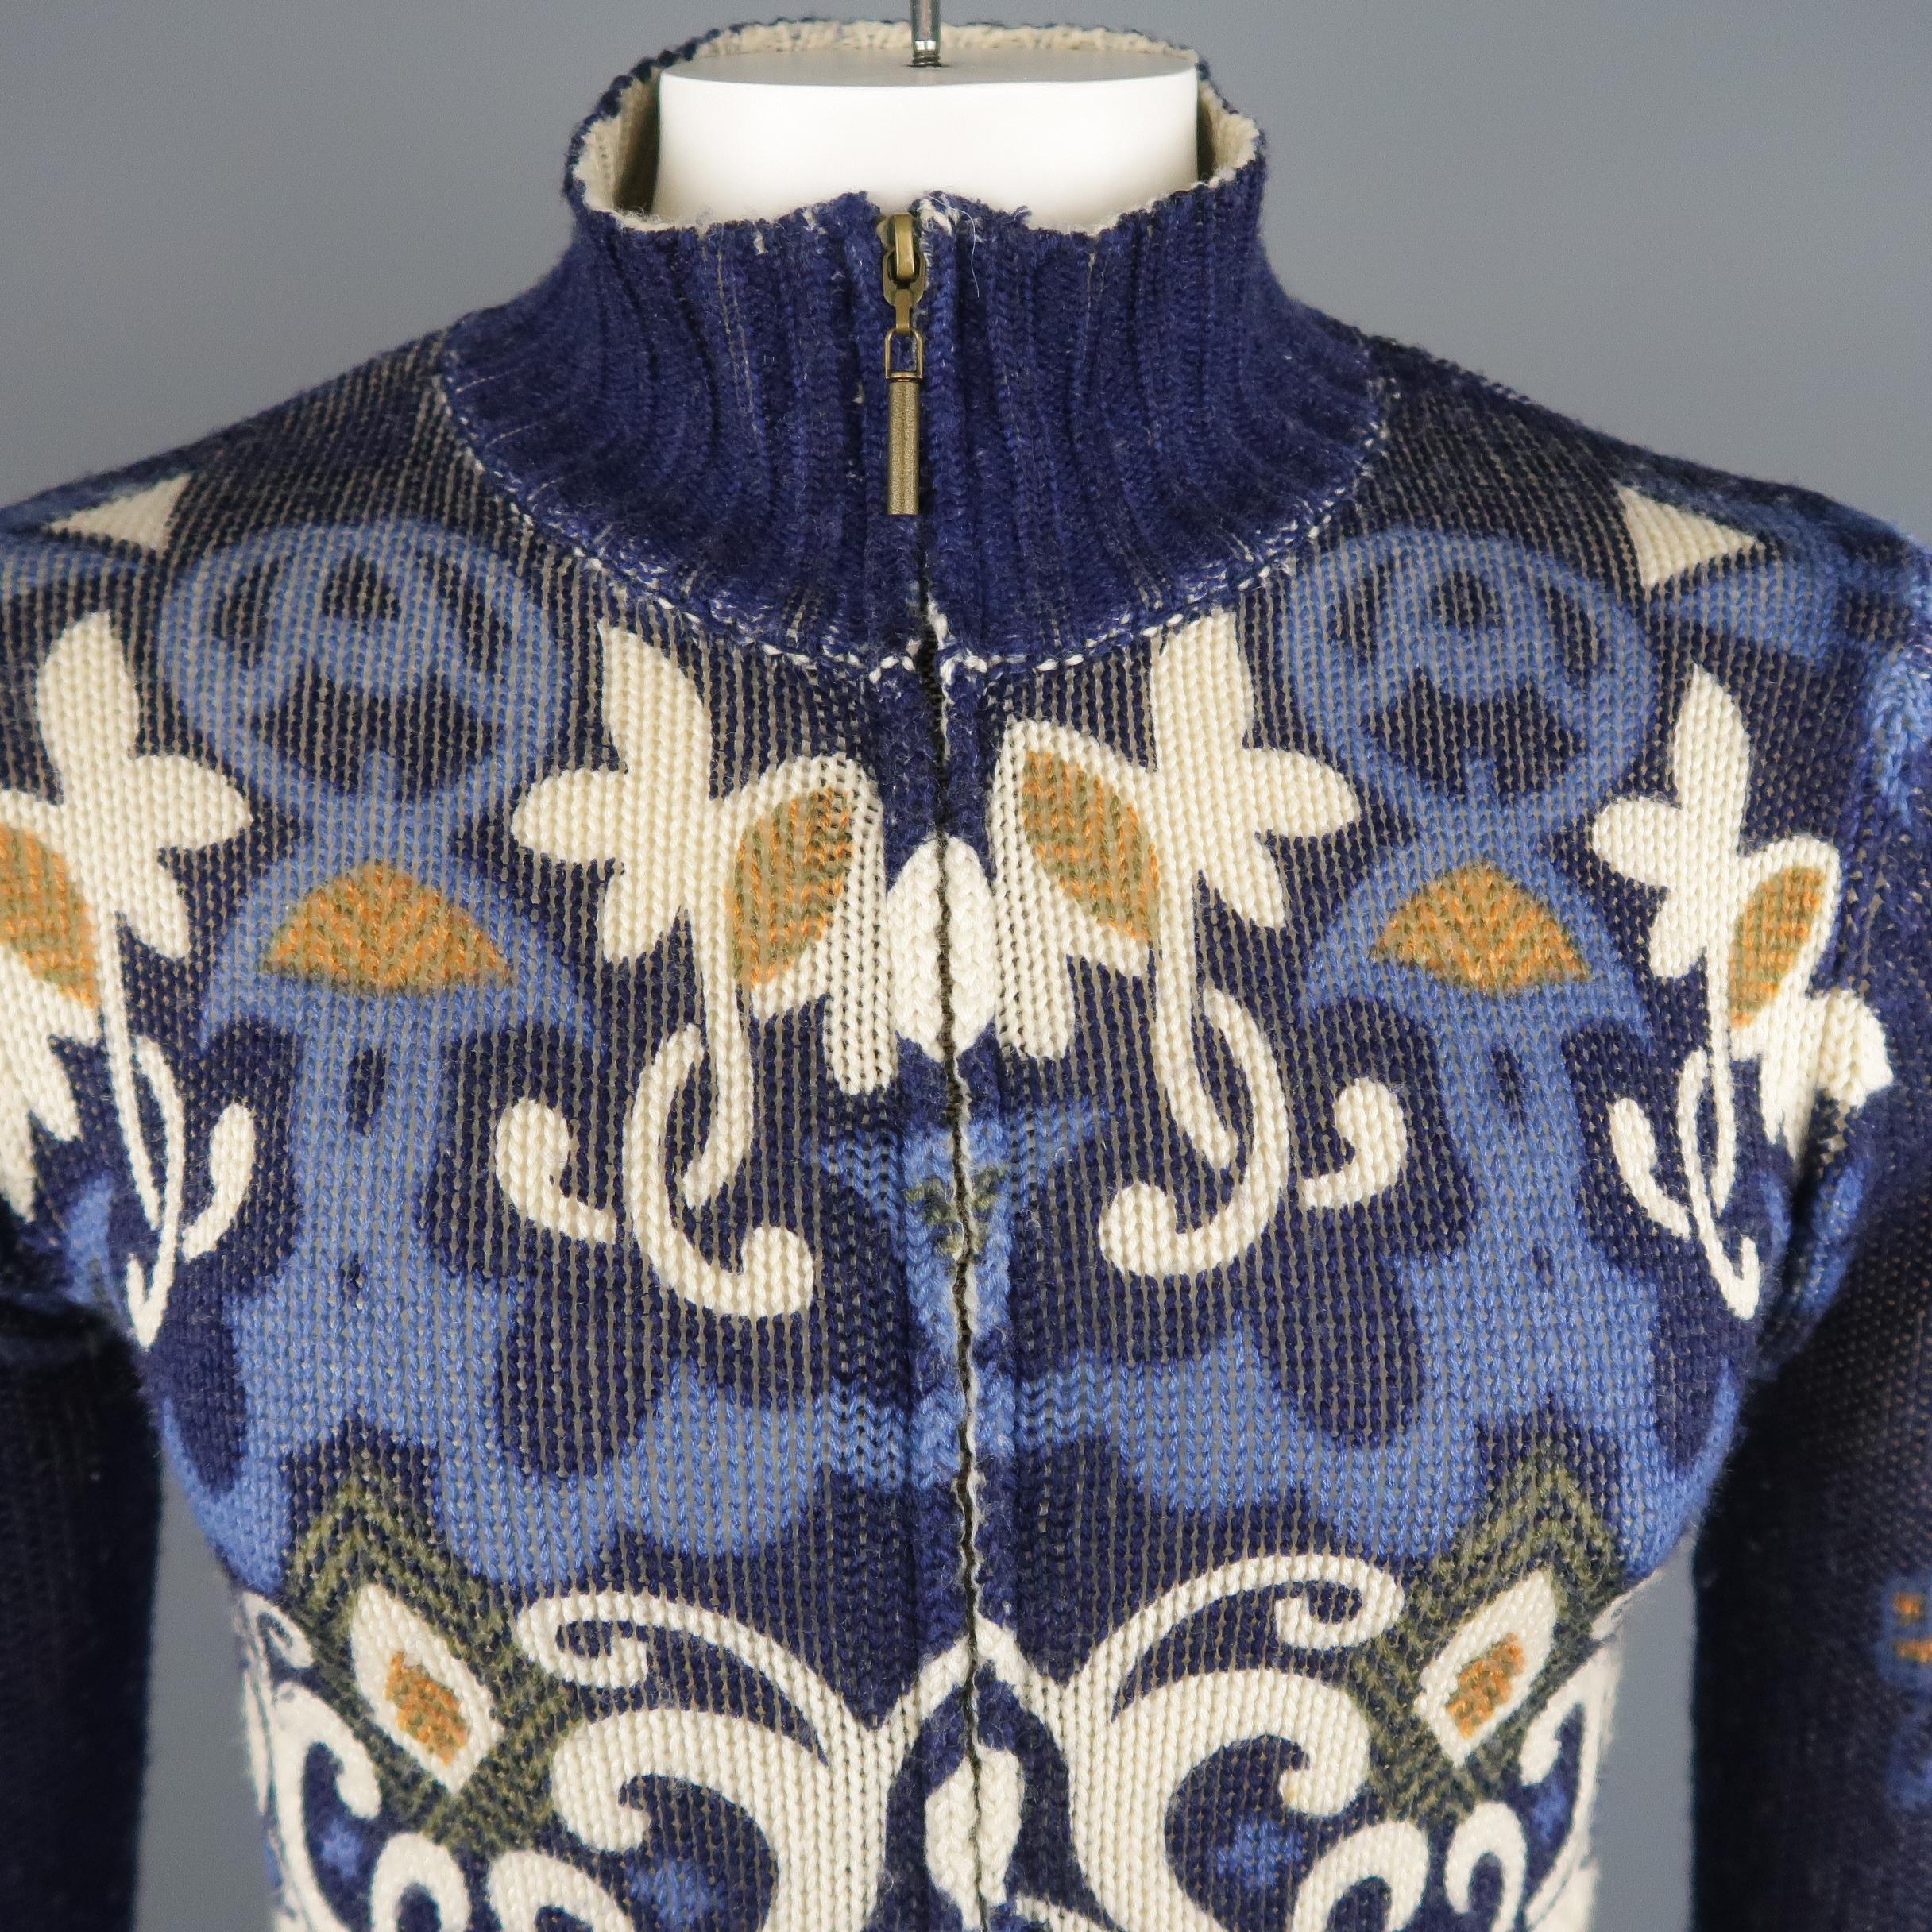 JUST CAVALLI Cardigan Sweater comes in a navy tone in a printed knit wool material, with a high collar, ribbed cuffs and hem, zip up. Made in Italy.  
 
Excellent Pre-Owned Condition.
Marked: M
 
Measurements:
 
Shoulder: 16.5 in.
Chest: 37